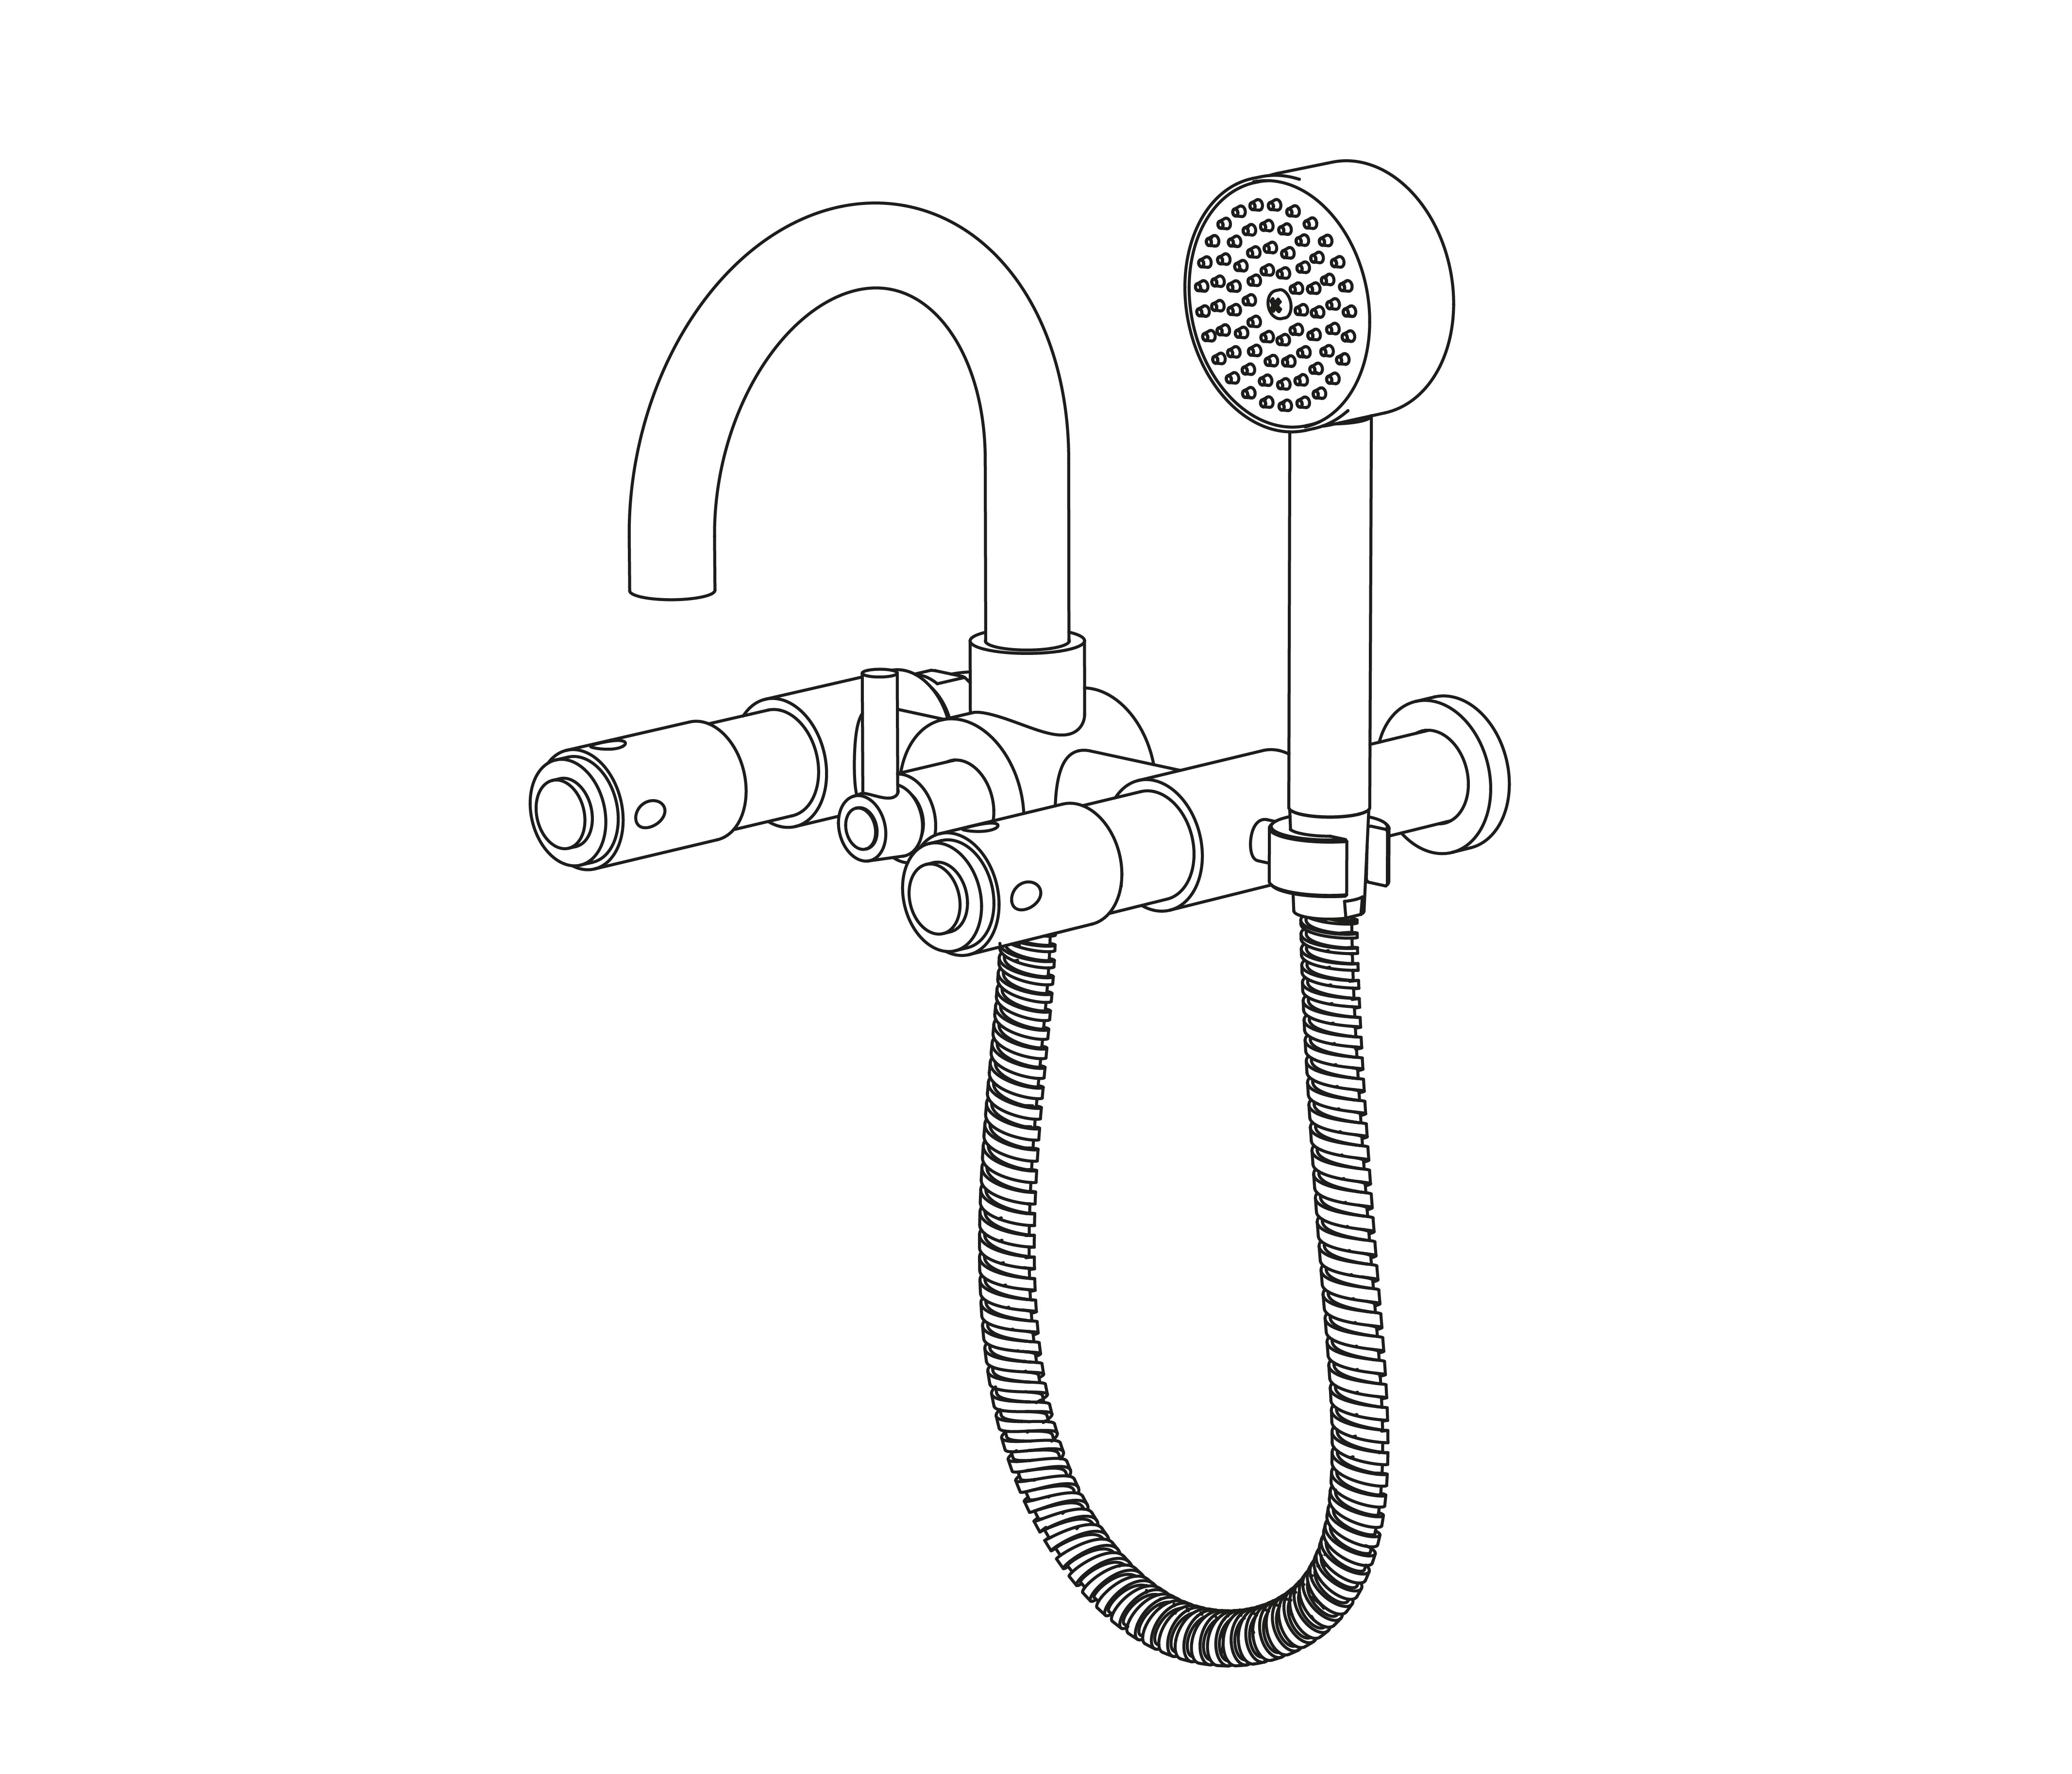 C32-3201 Wall mounted bath and shower mixer